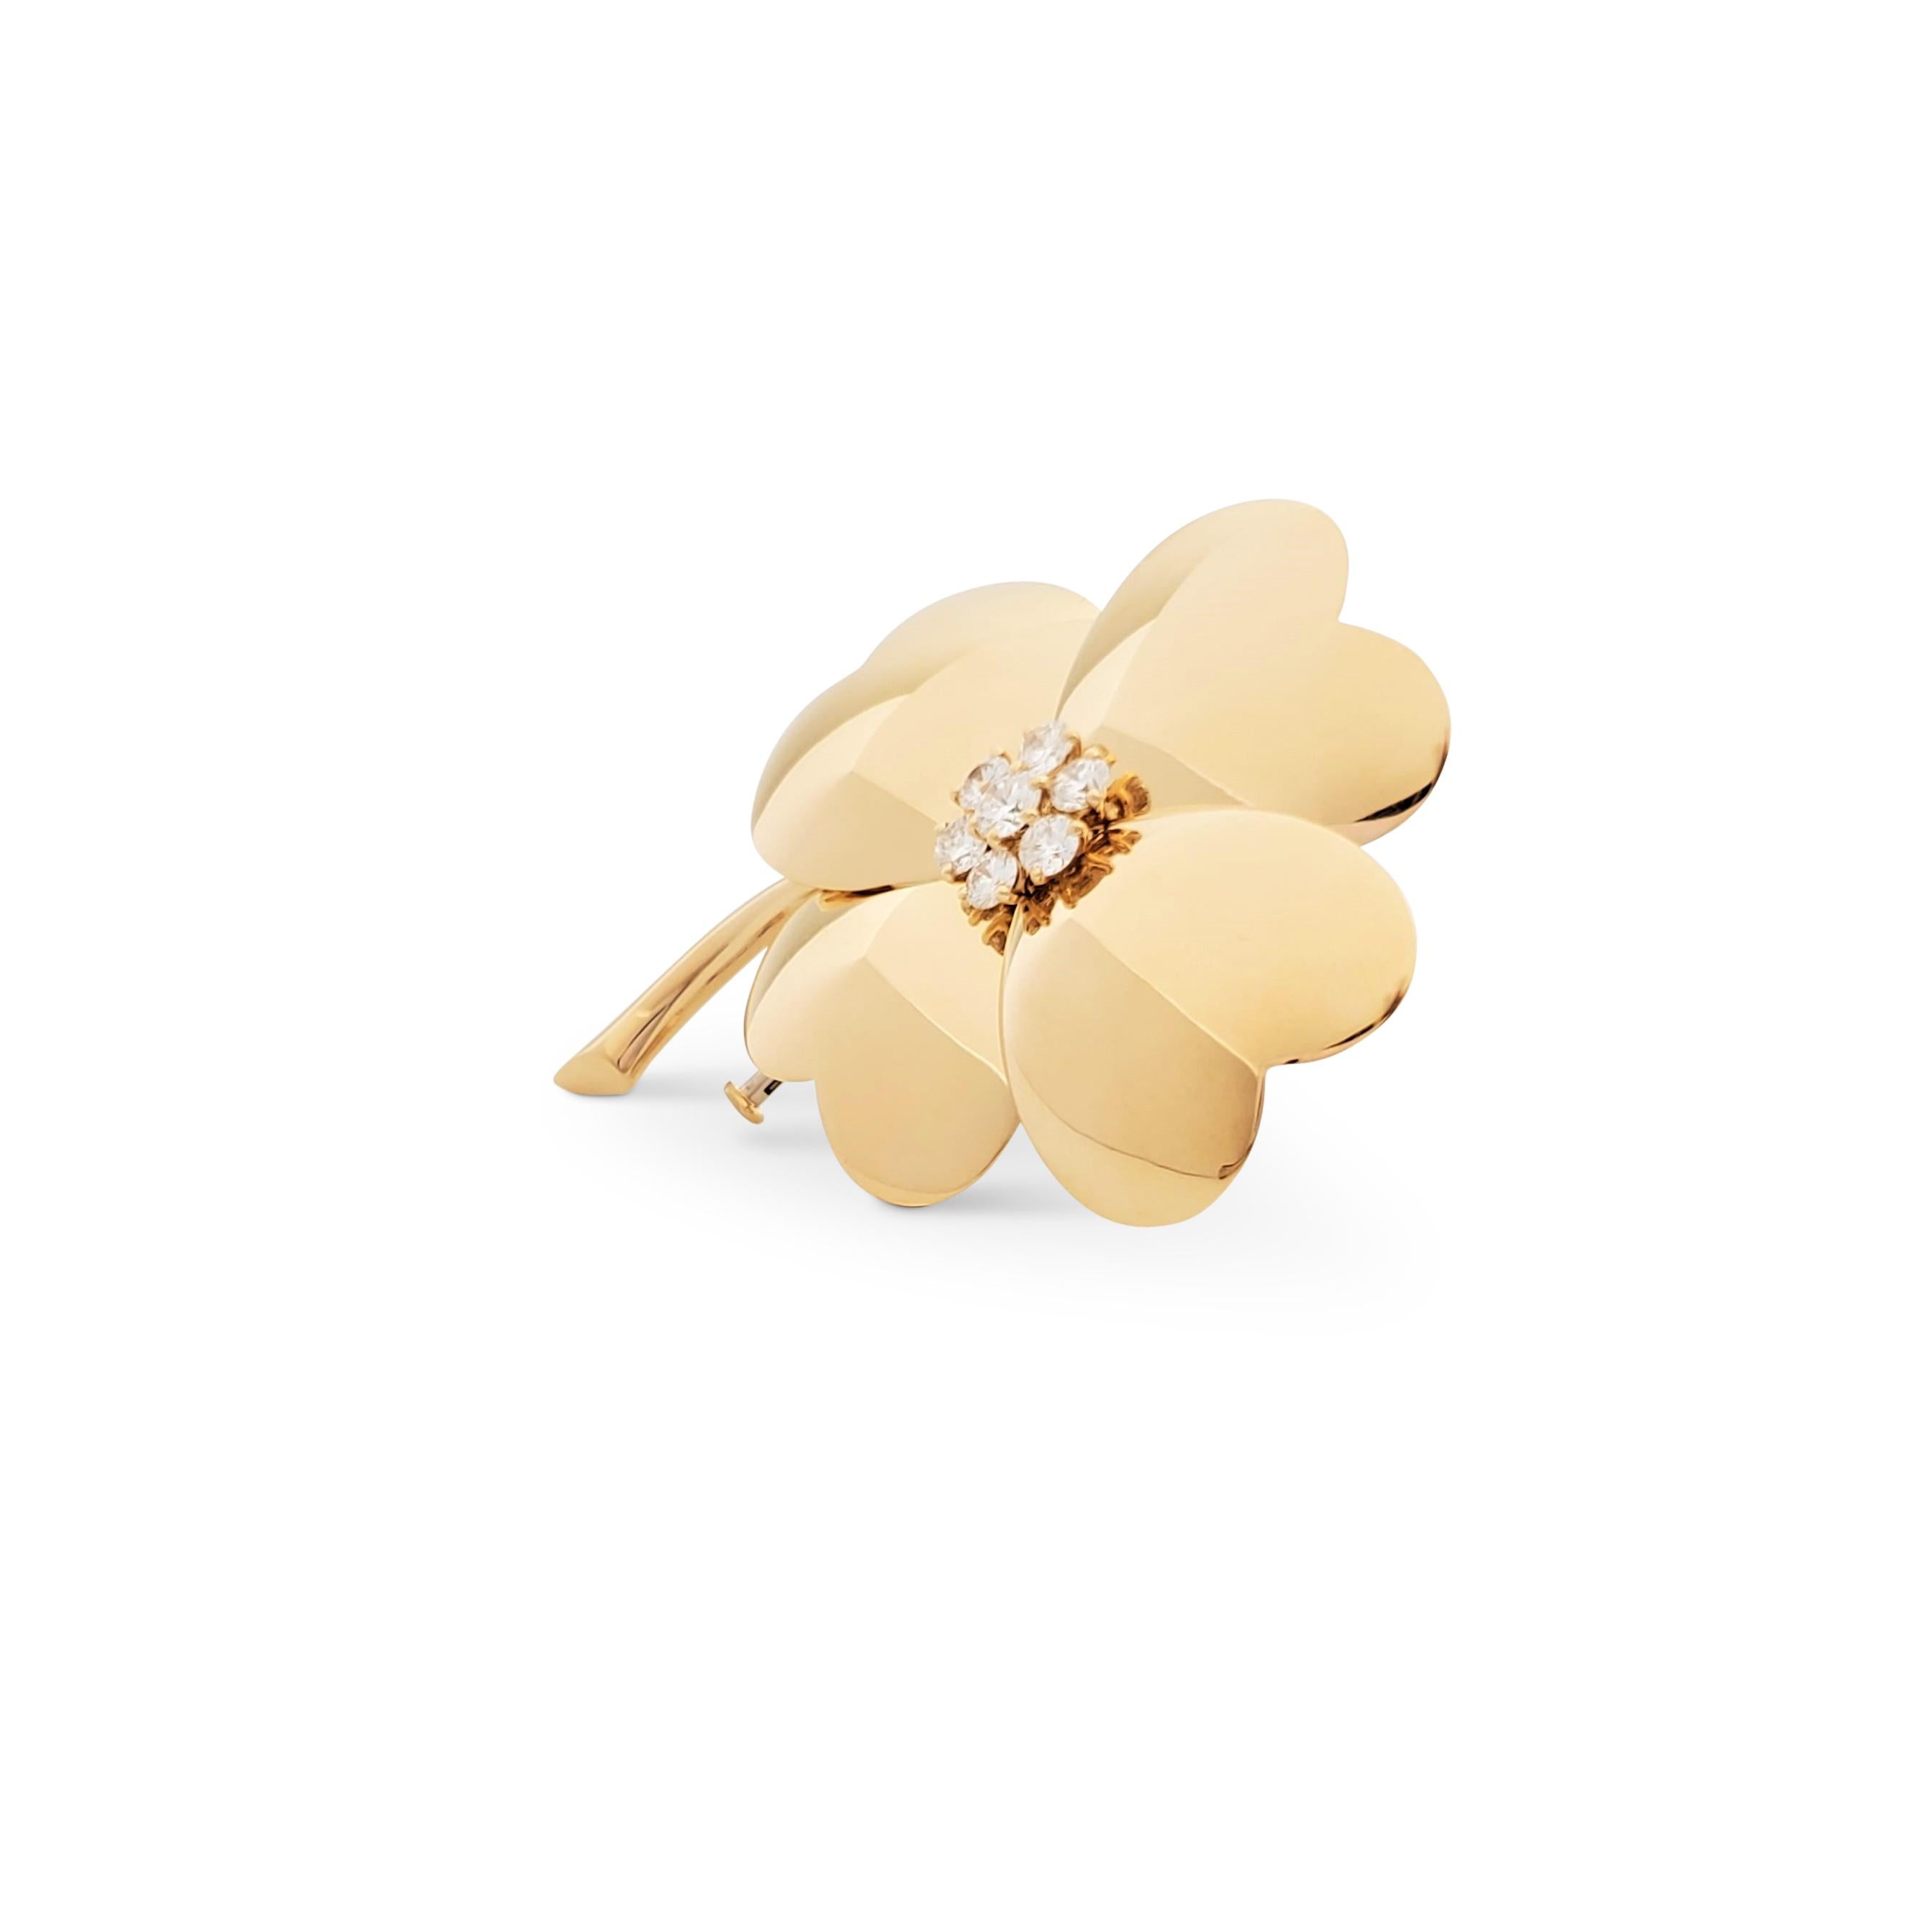 Authentic Van Cleef & Arpels pin from the iconic 'Cosmos' collection. Designed as a flower composed of four heart-shaped petals crafted in 18 karat yellow gold. The center is highlighted with round brilliant cut diamonds (E-F color, VS clarity)